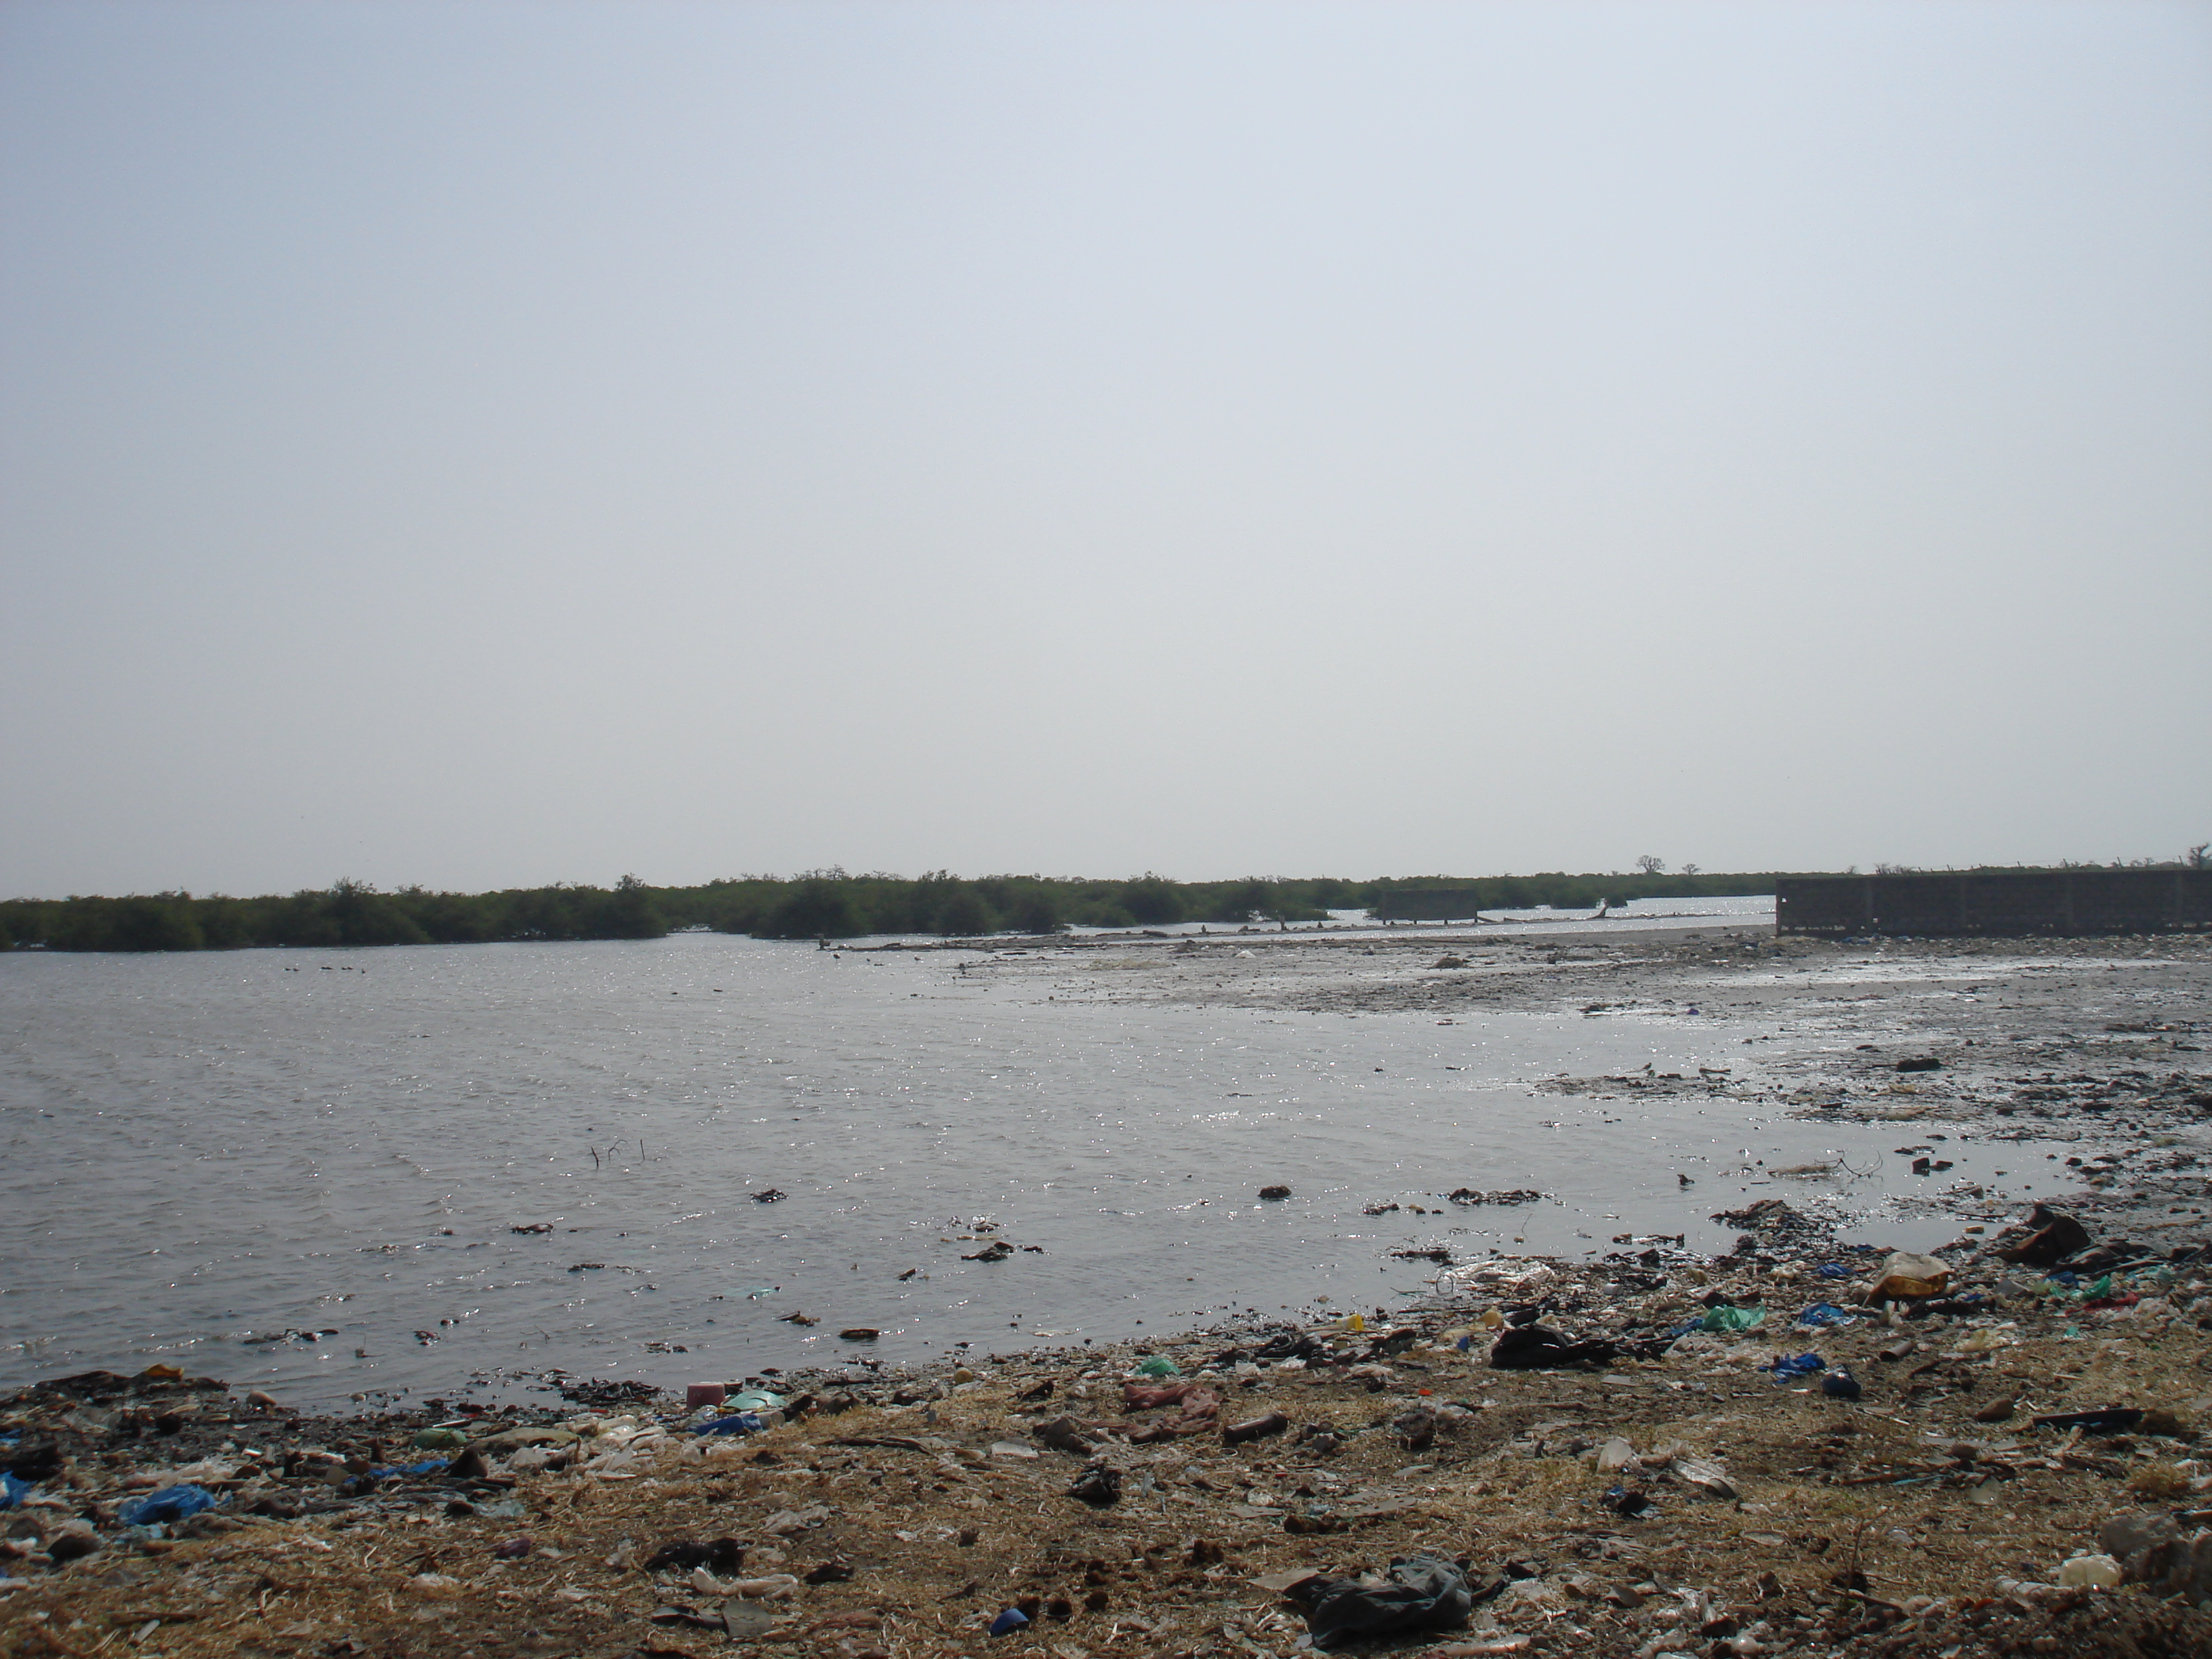 mangrove-area-with-high-level-of-solid-waste-pollution.jpg